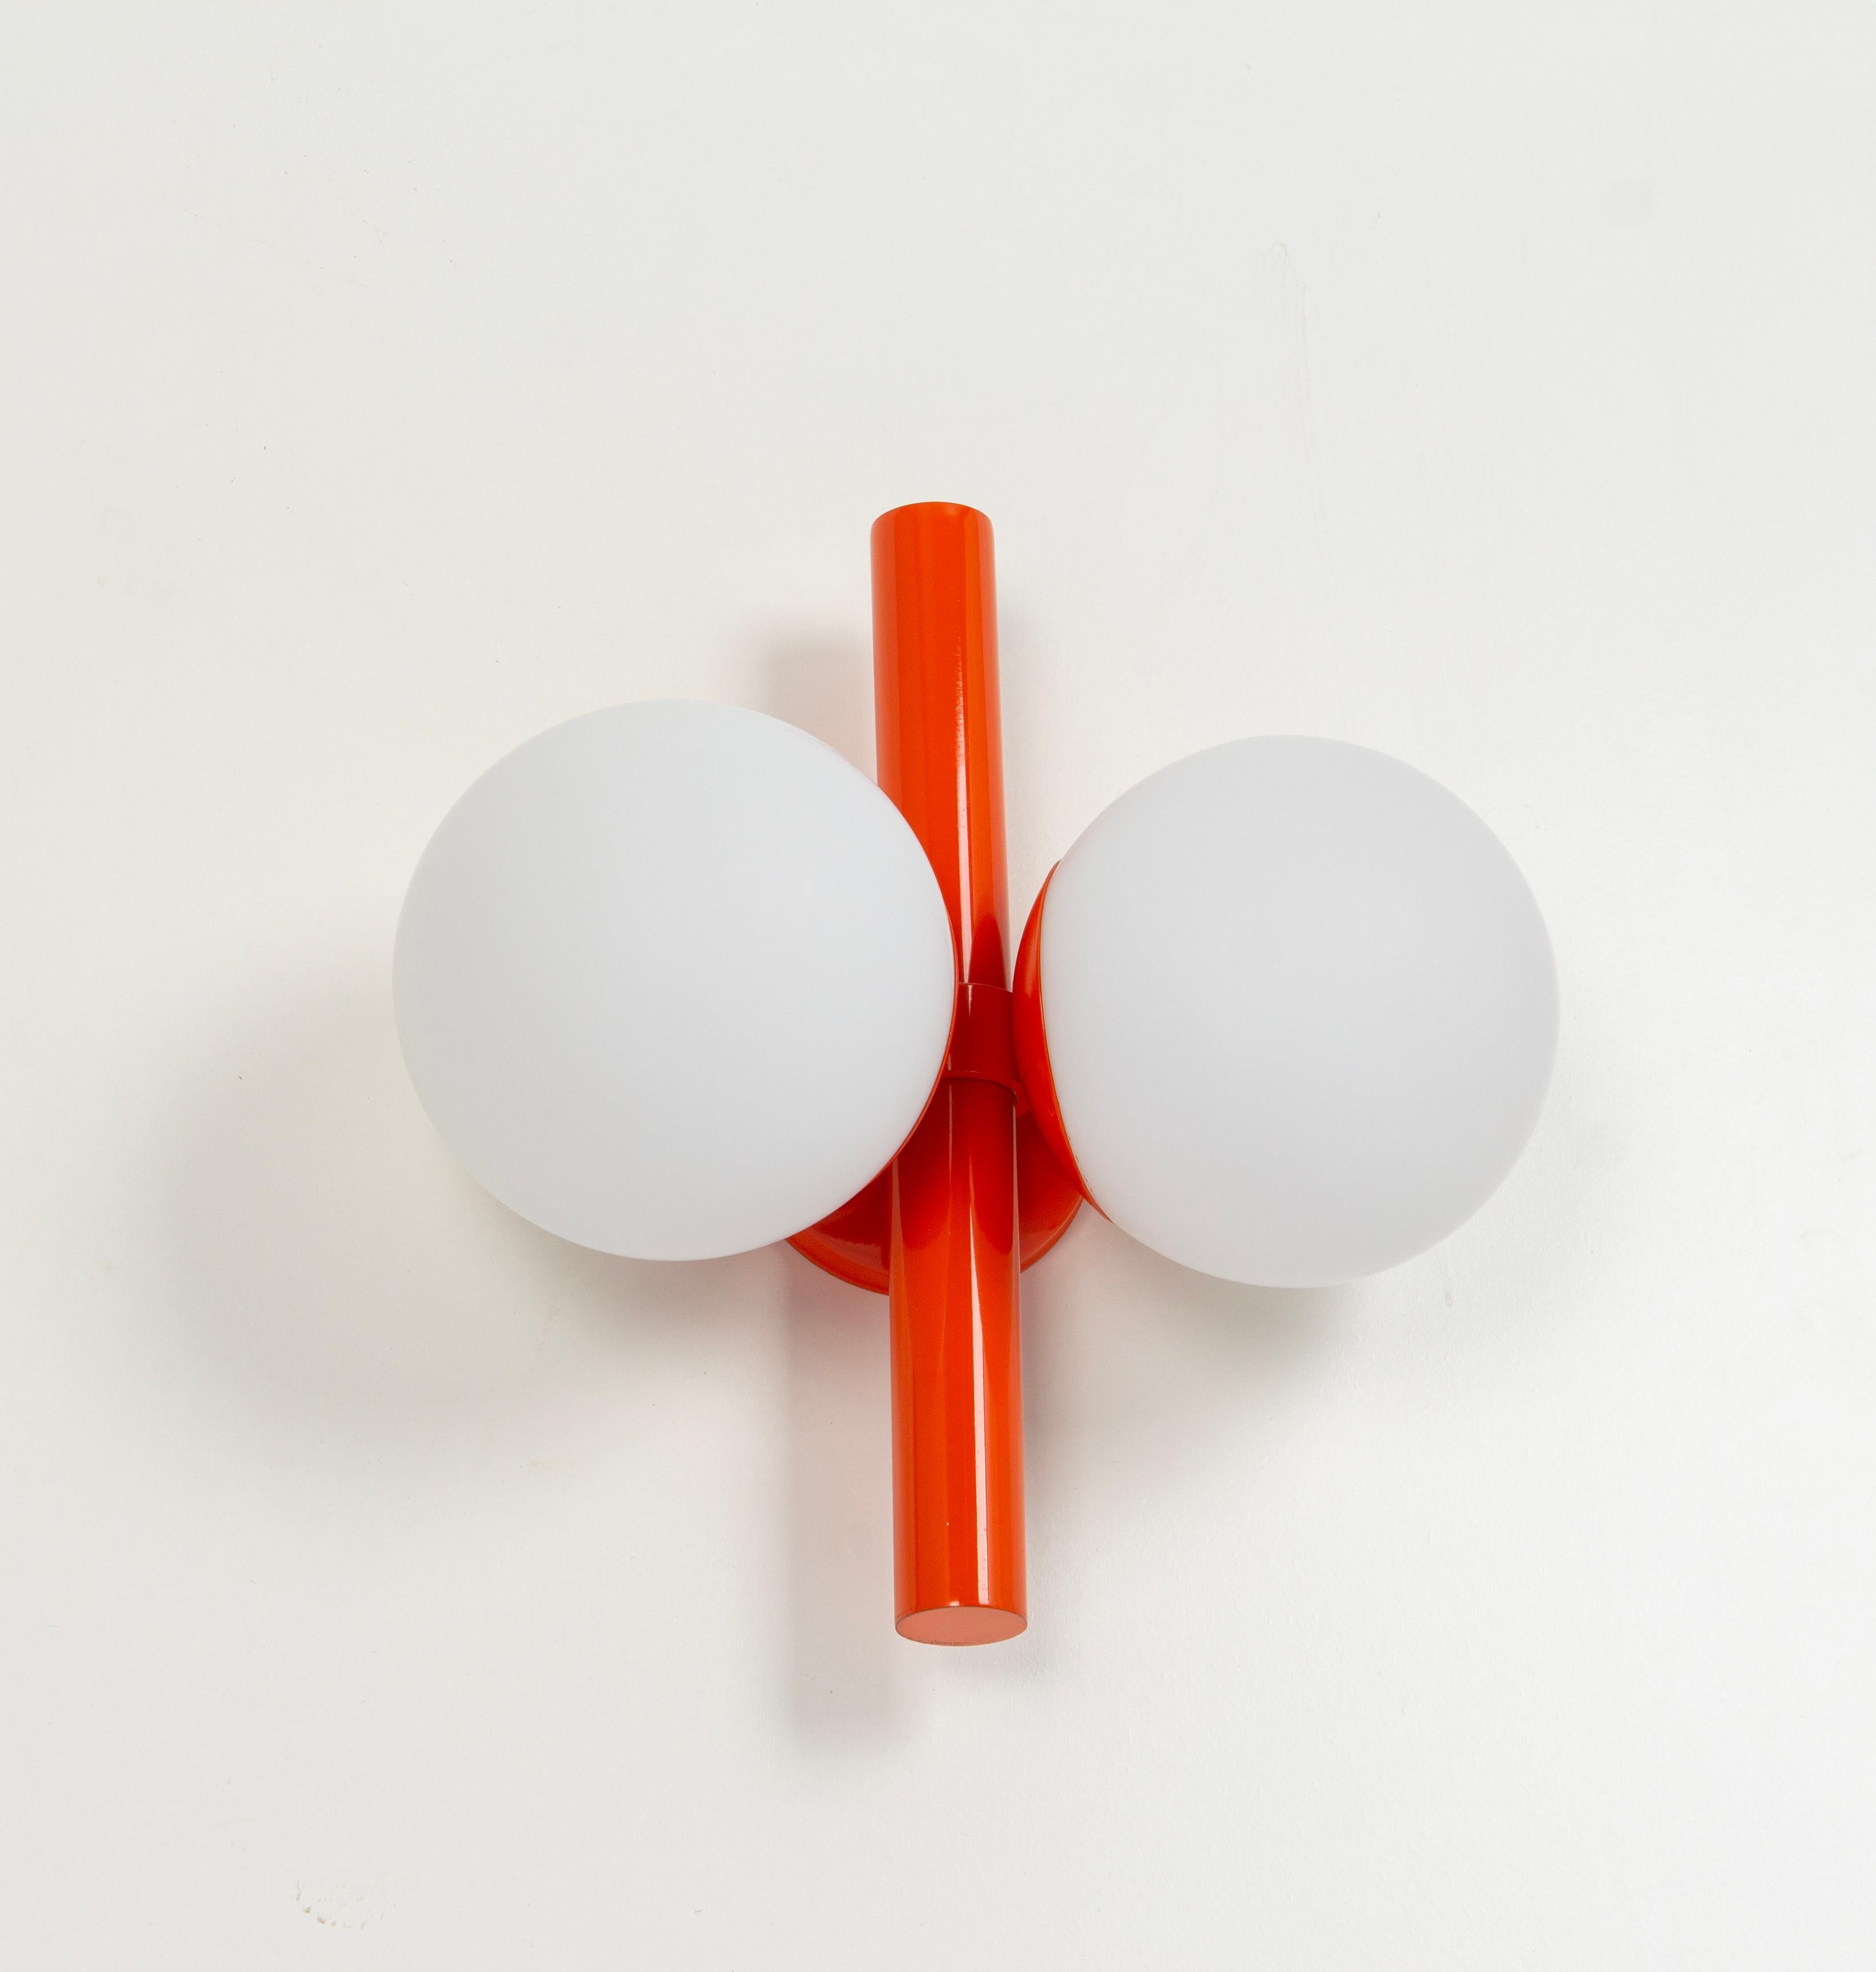 Late 20th Century 1 of 3 Midcentury Orbital Wall lights in Orange by Kaiser, Germany, 1970s For Sale